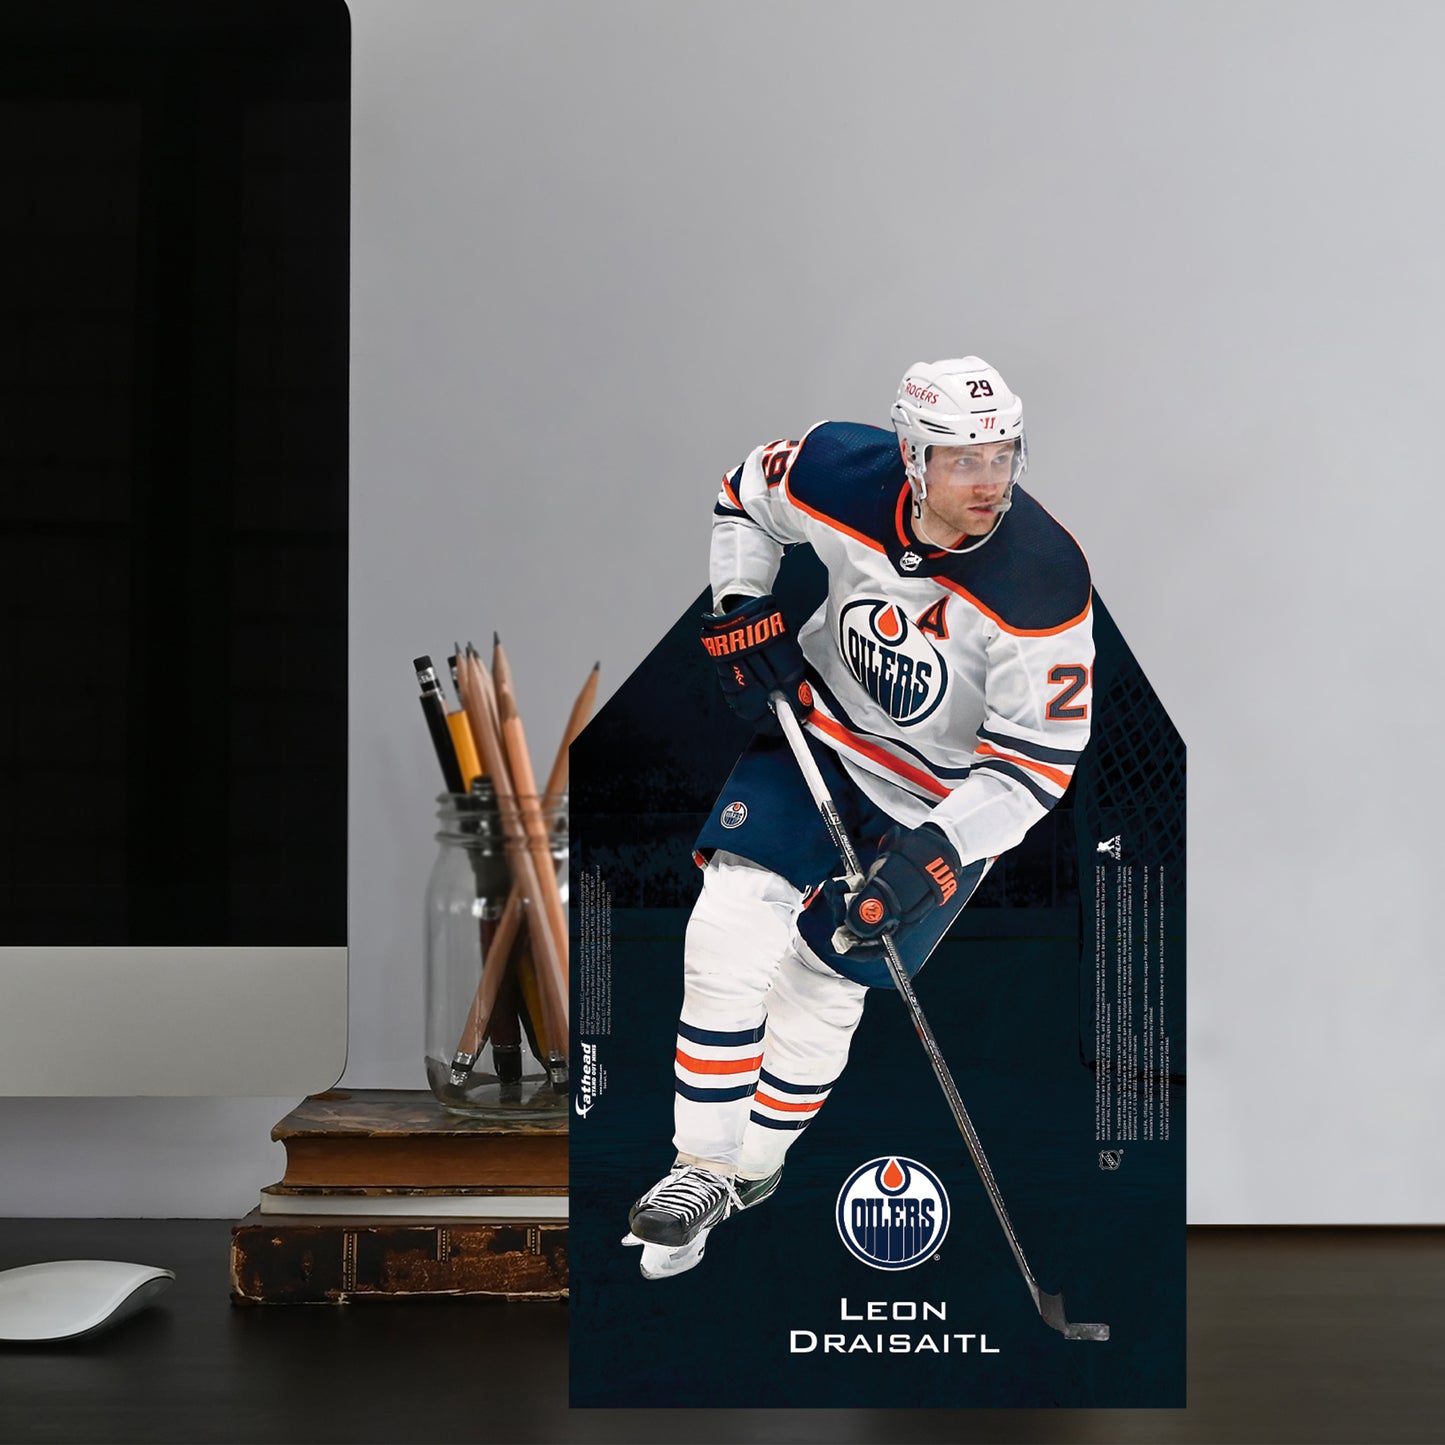 Edmonton Oilers: Leon Draisaitl 2021  Mini   Cardstock Cutout  - Officially Licensed NHL    Stand Out